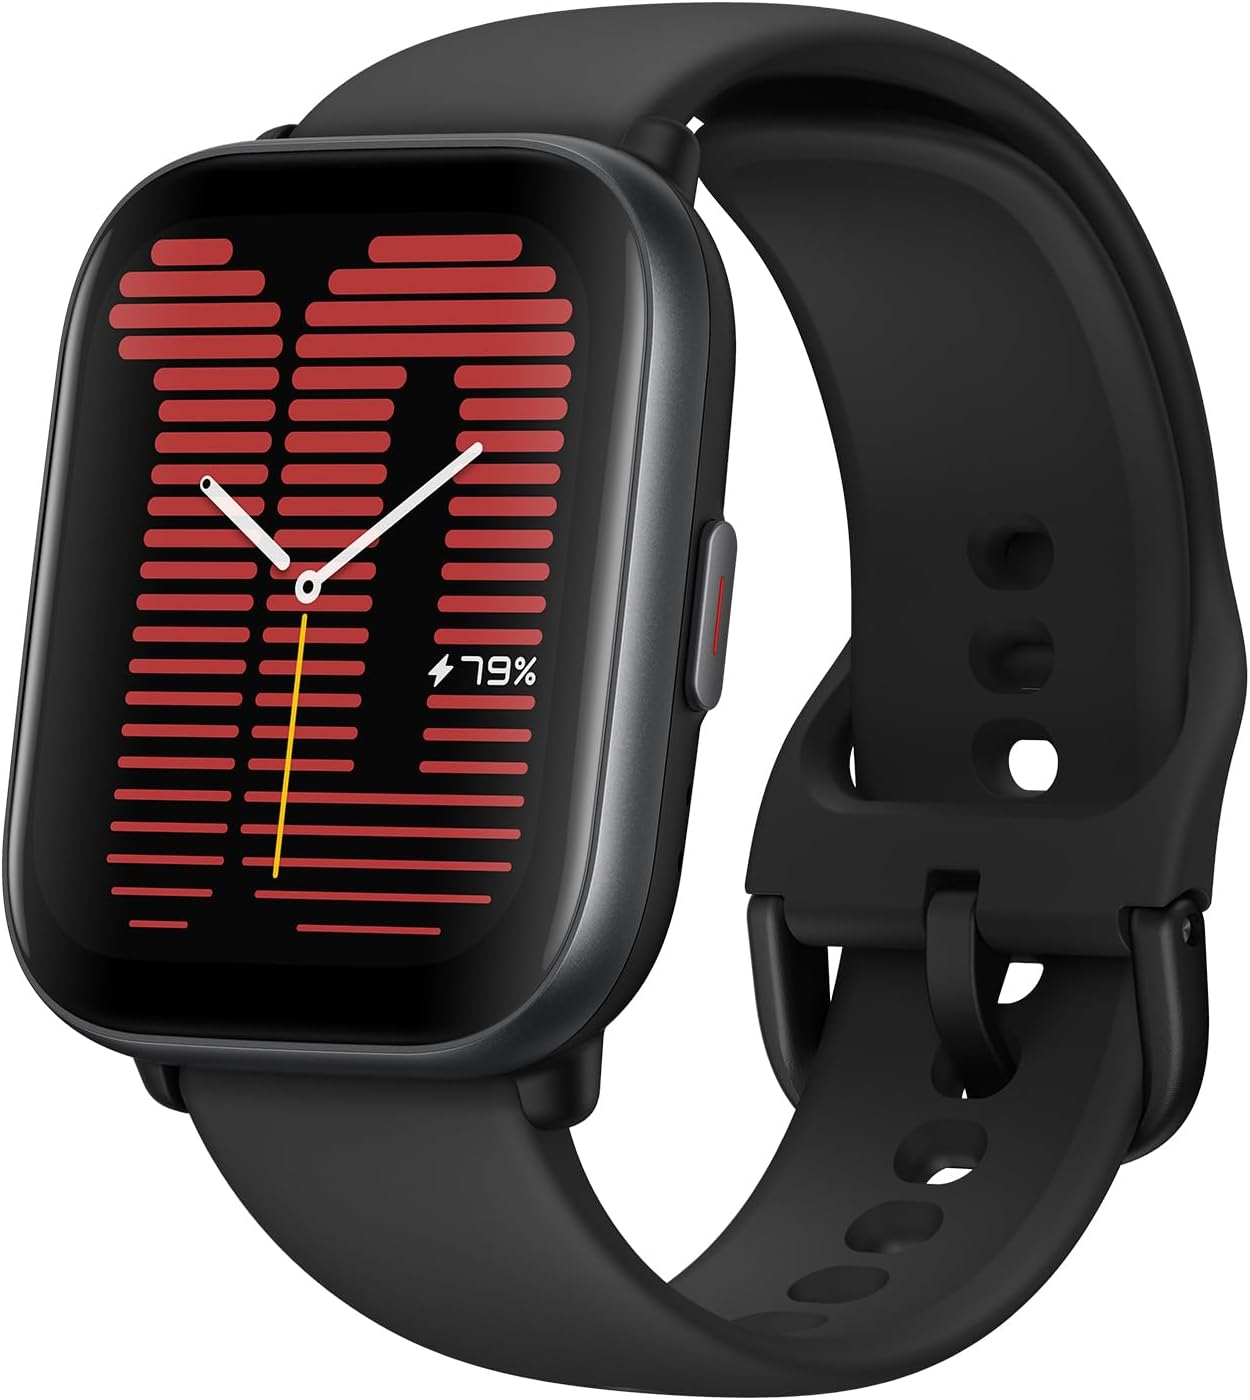 Isolated Image of Amazfit Active Smart Watch | best fitness tracker to use with an app